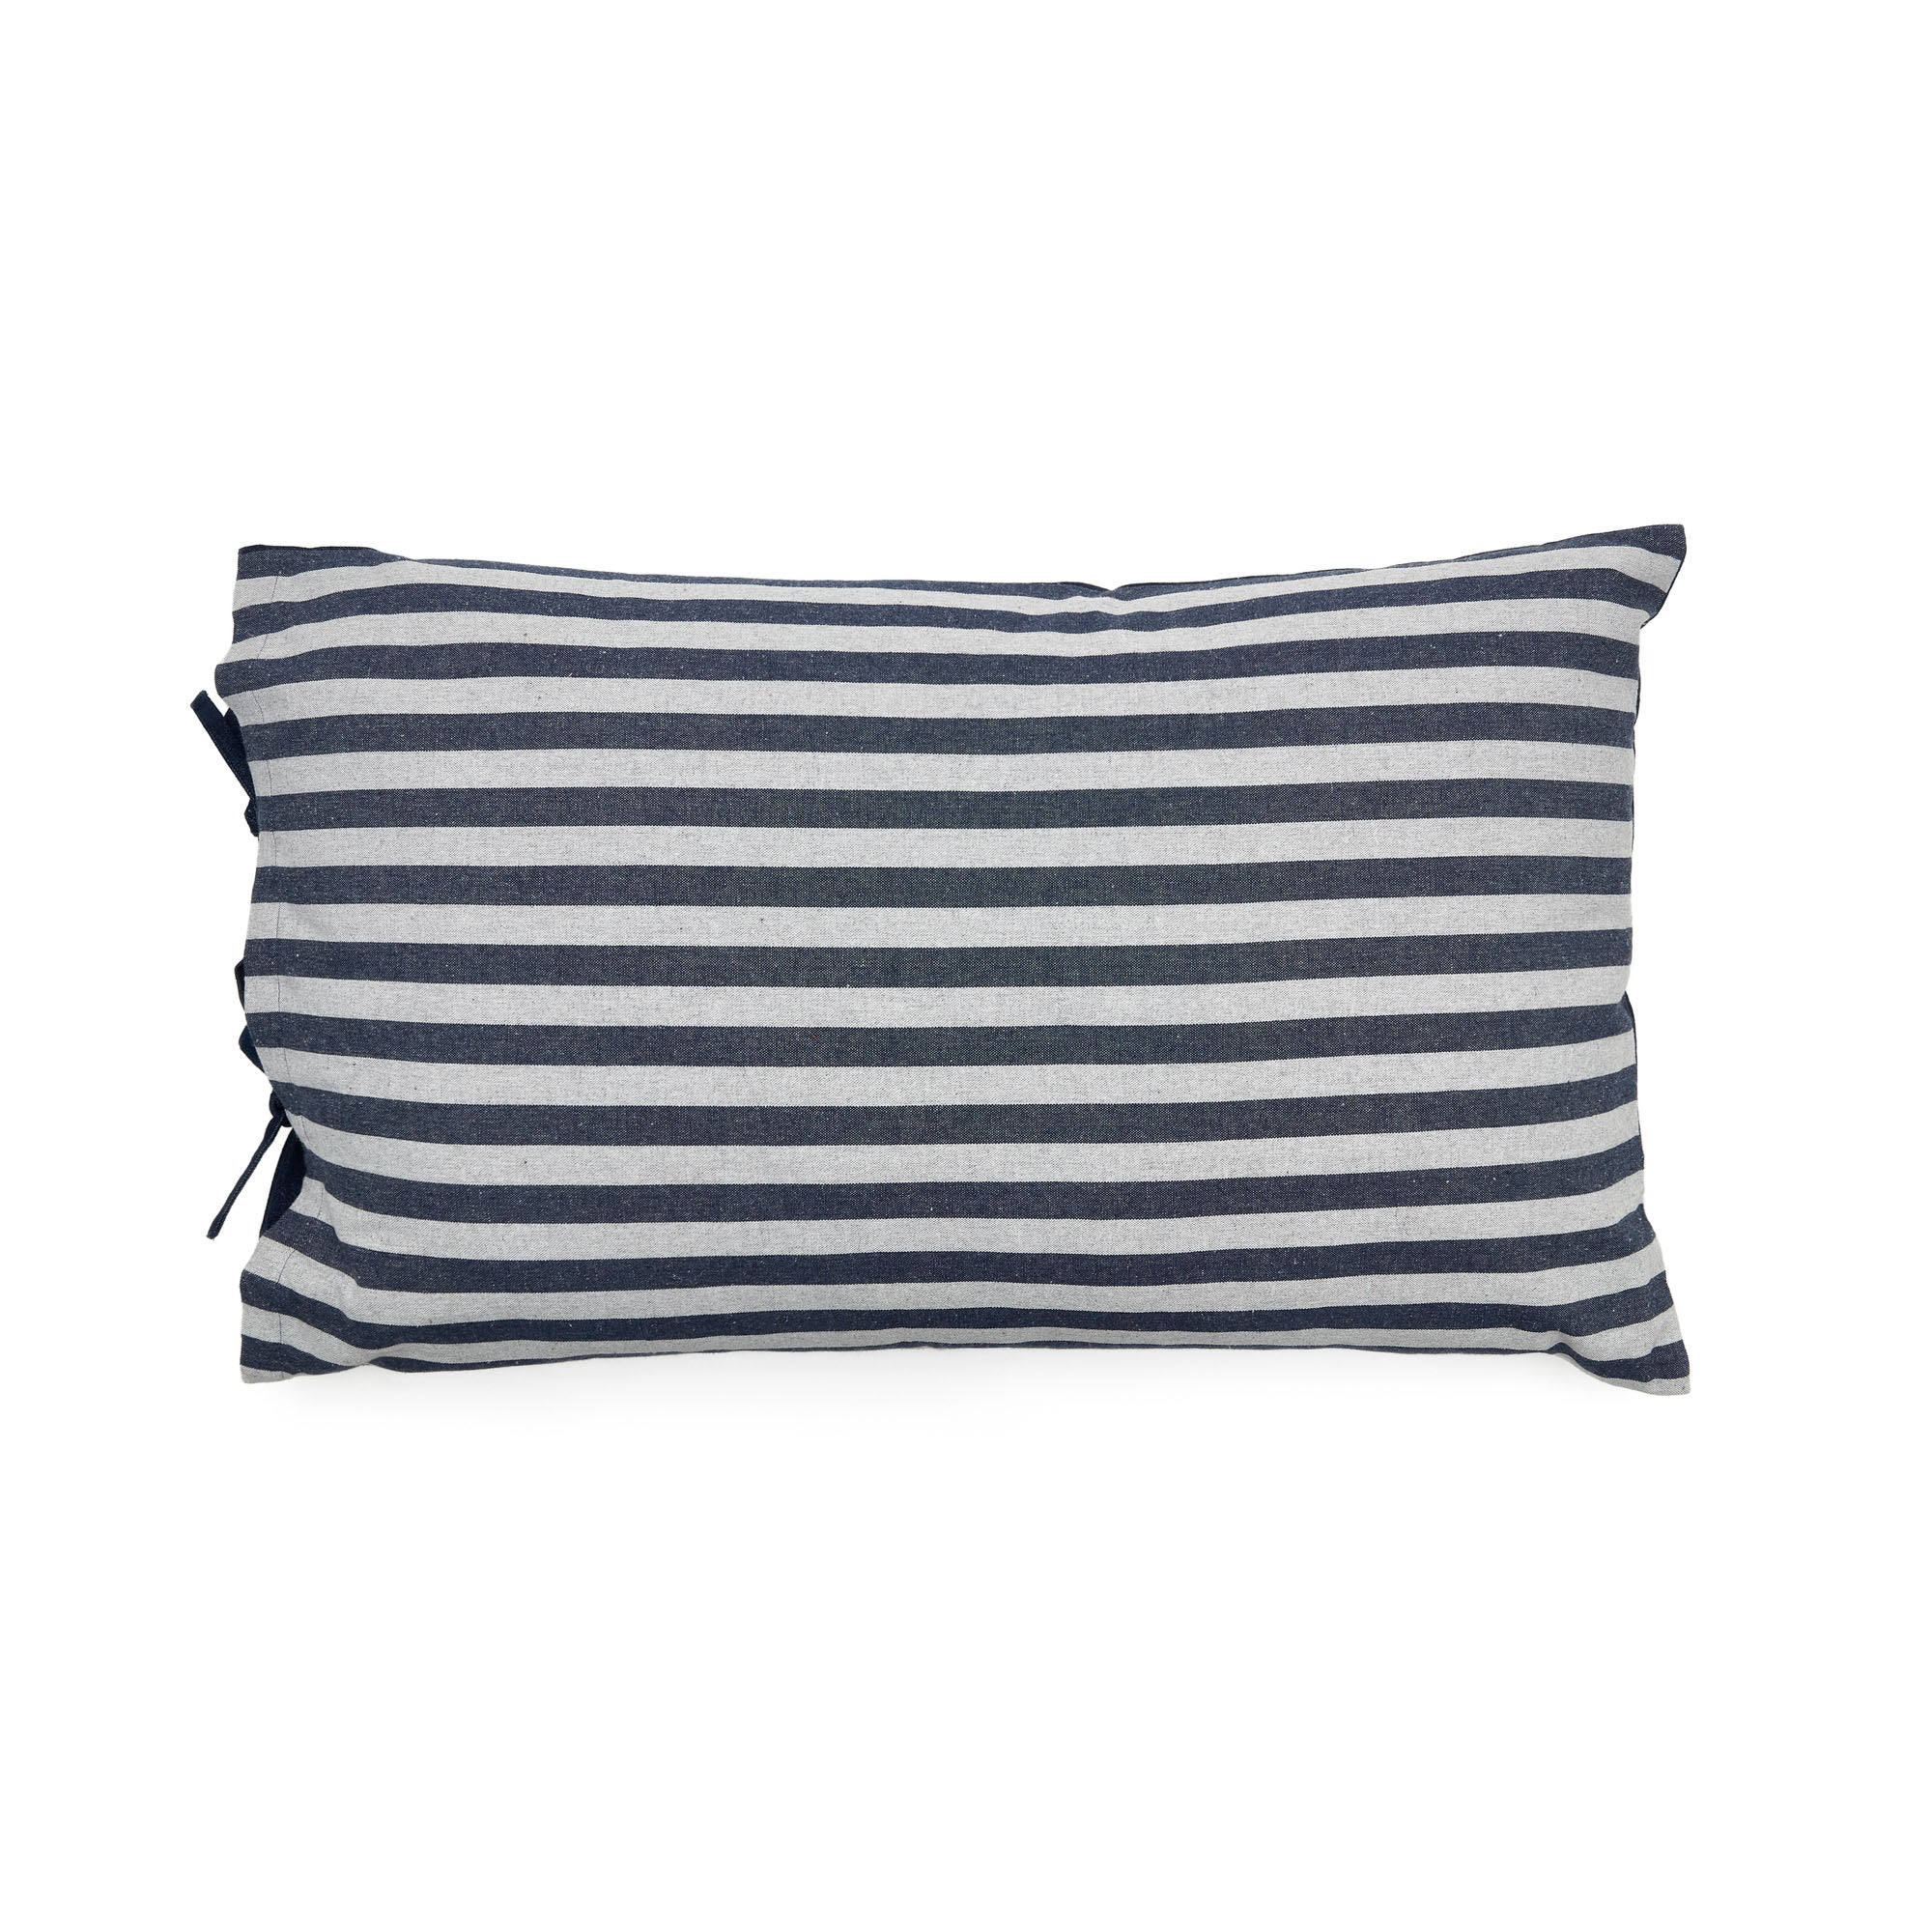 Tabby combined stripes 100% cotton cushion in blue and grey, 50 x 80 cm